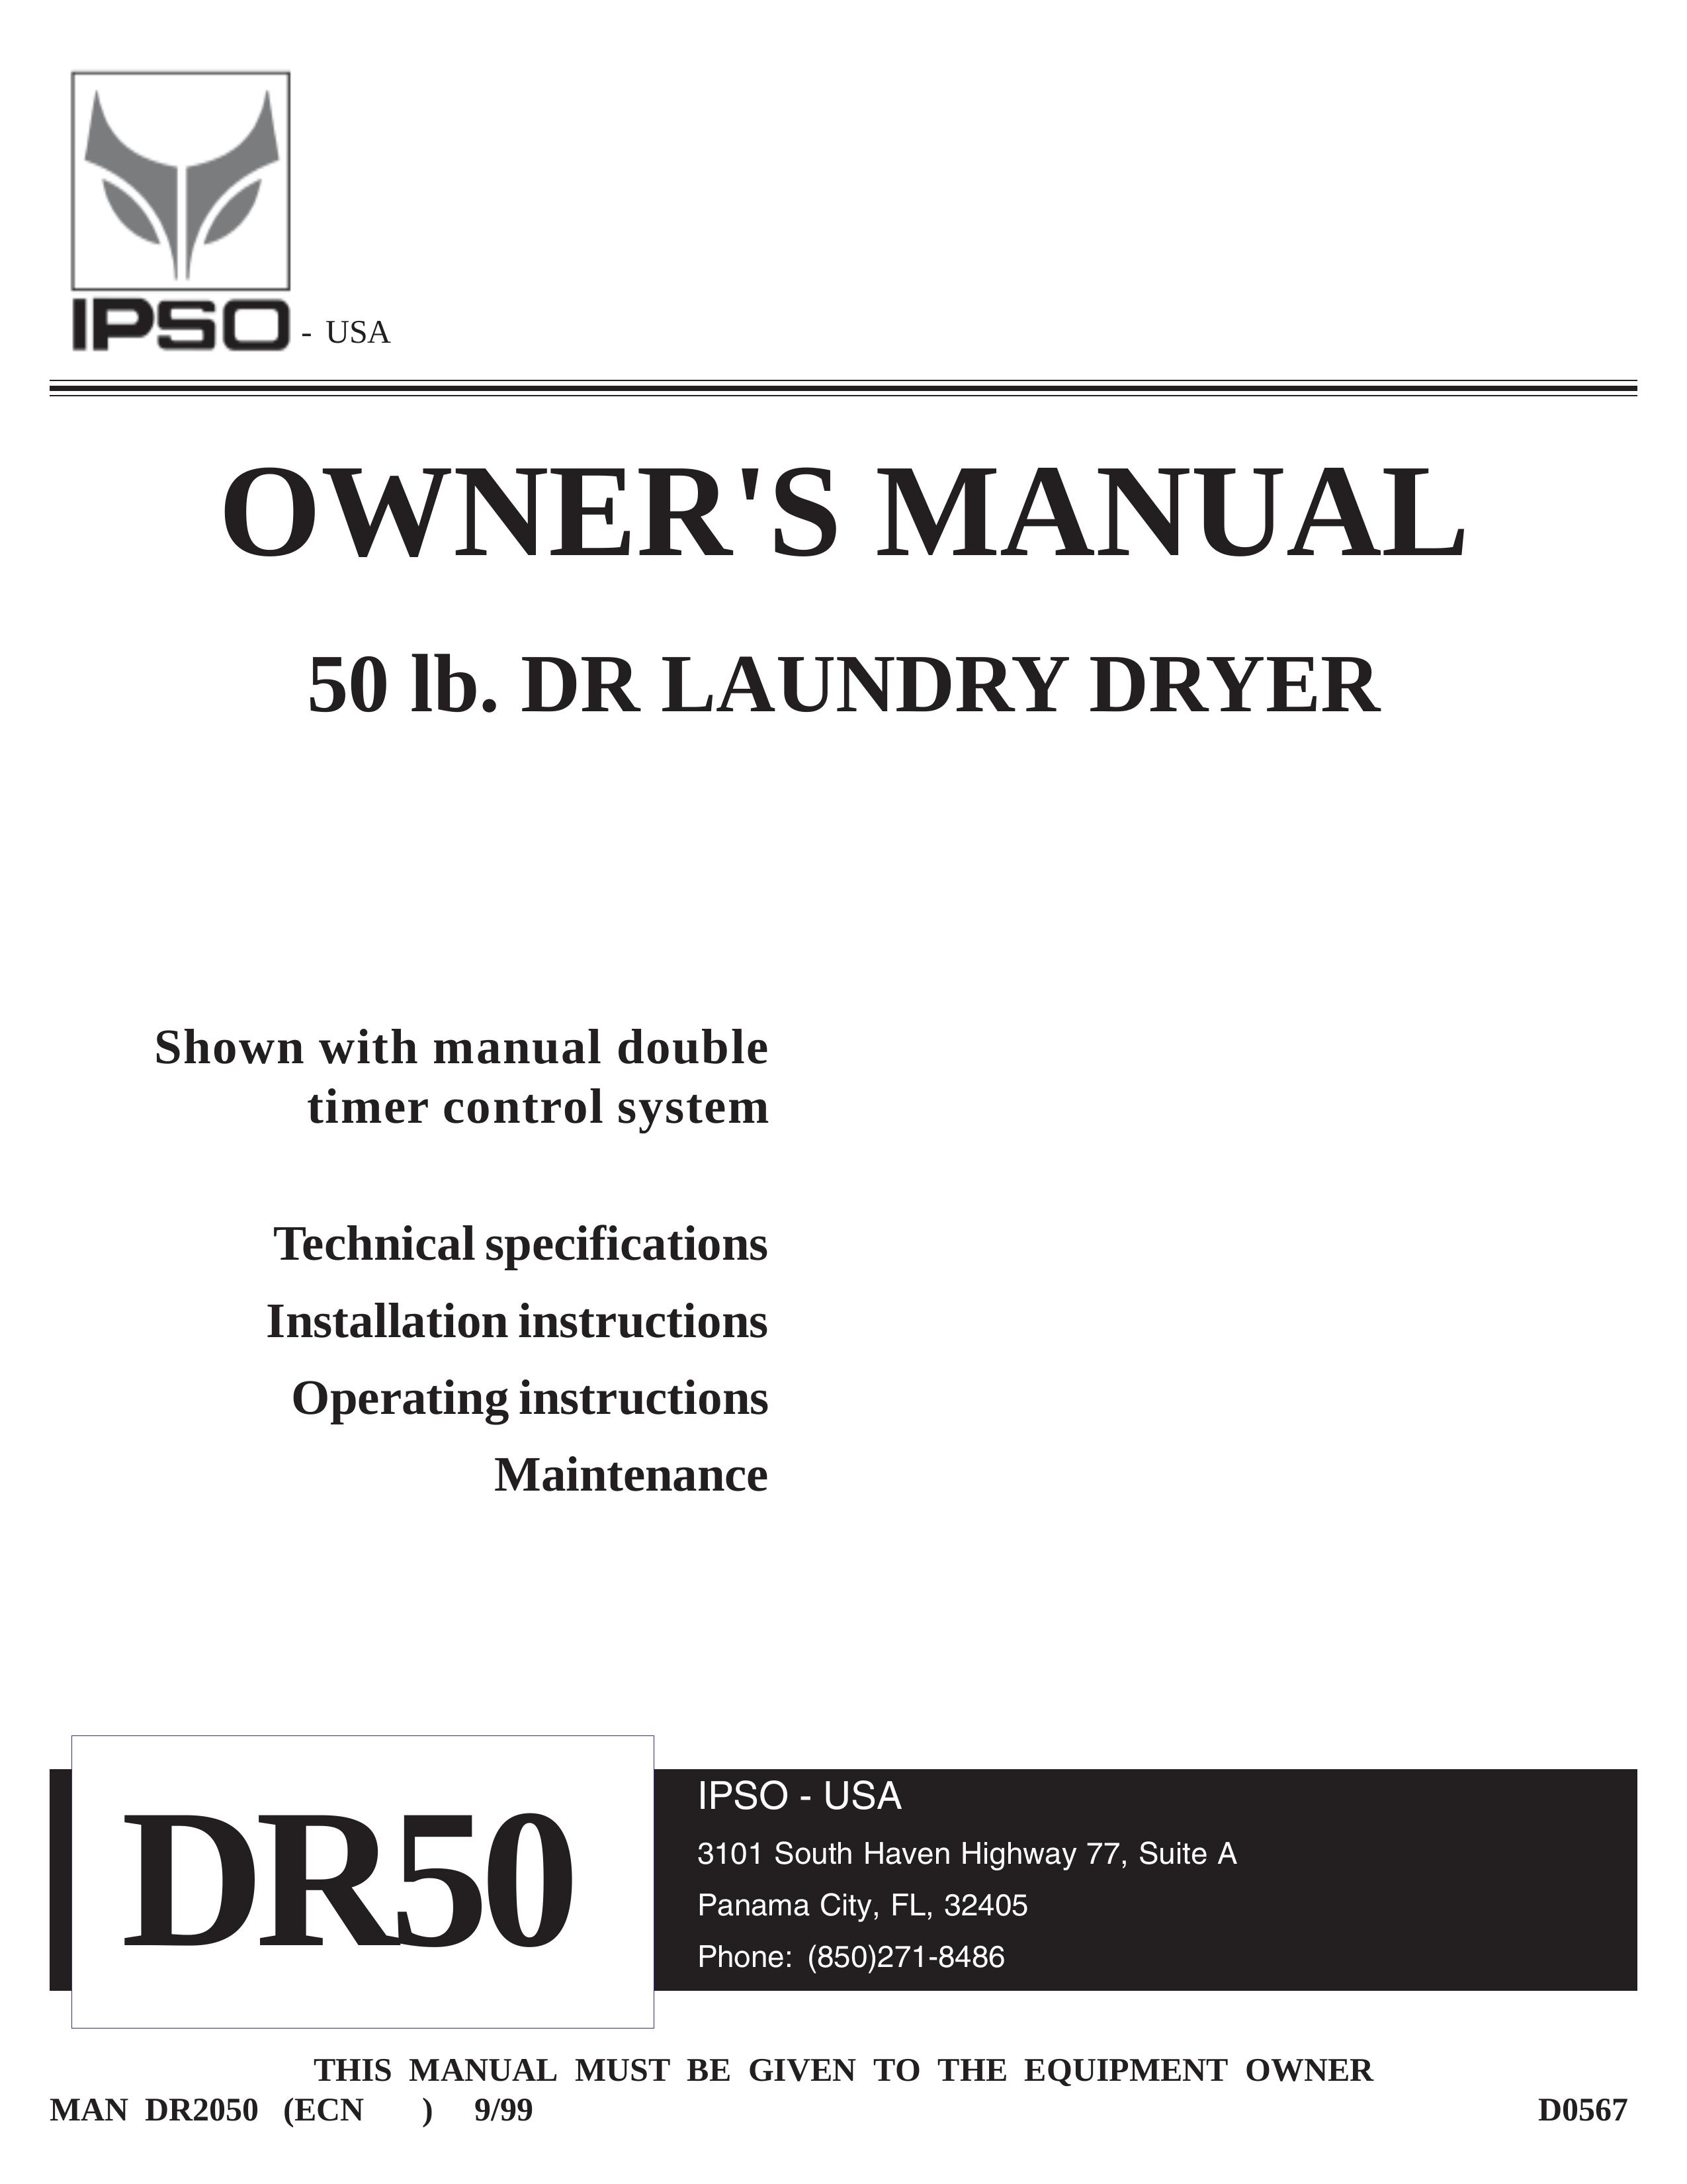 IPSO DR50 Clothes Dryer User Manual